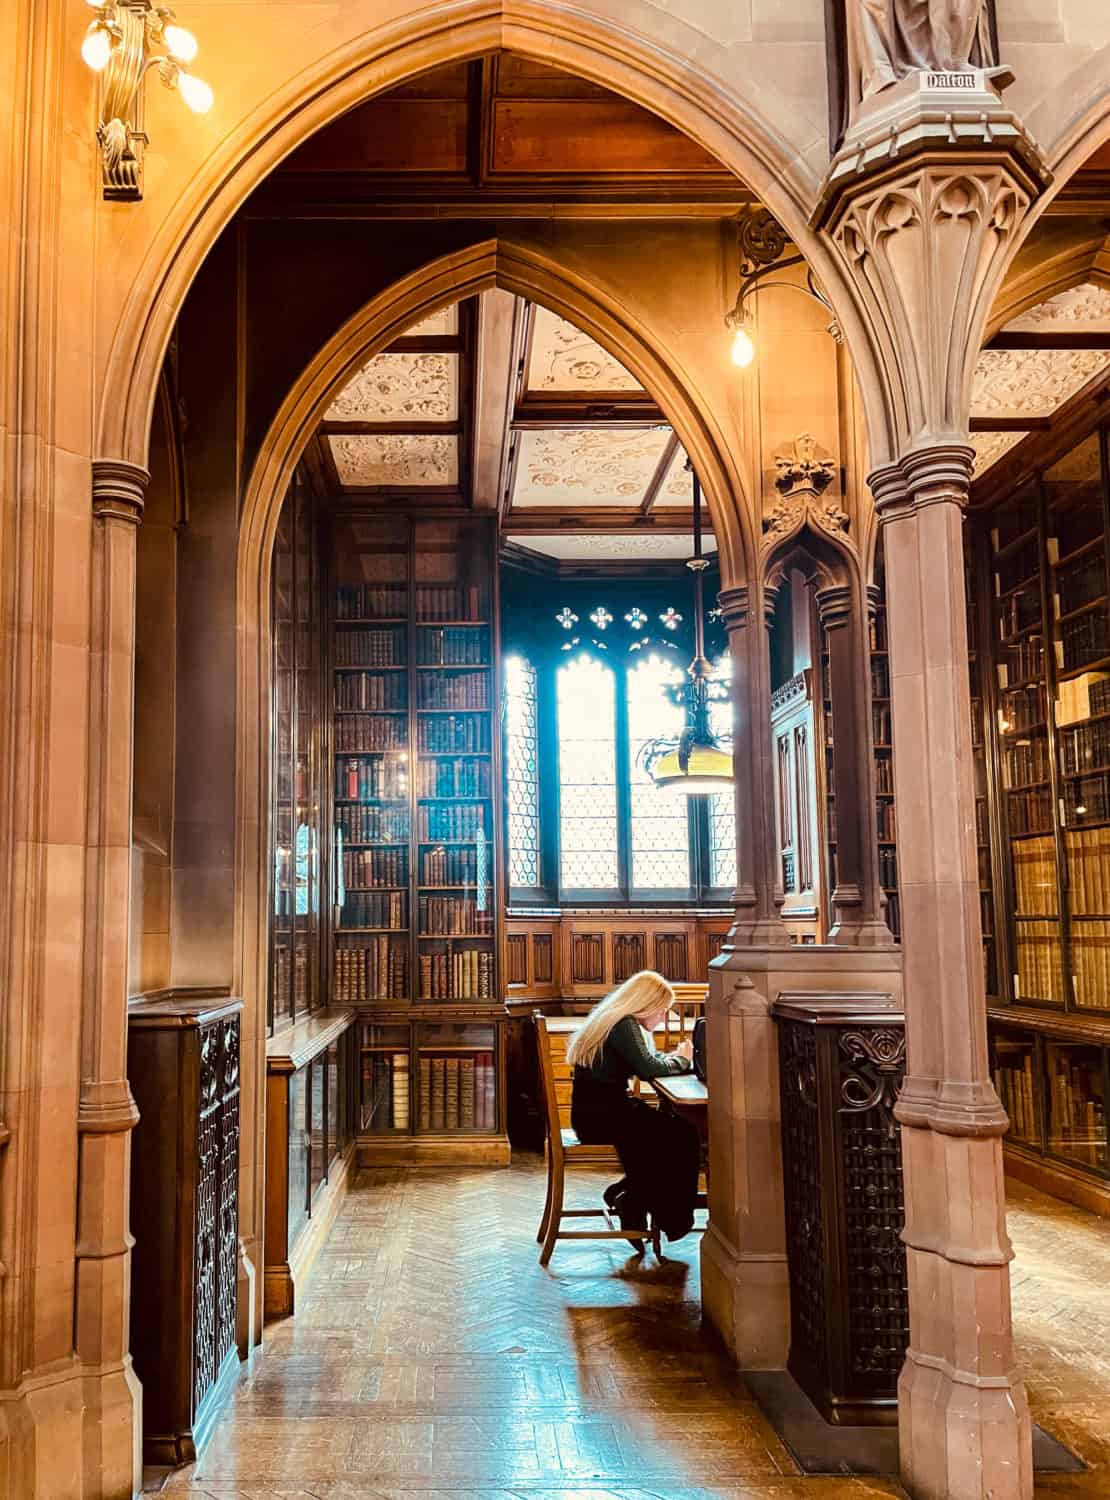 Manchester - Inside John Ryland library, a young woman studies